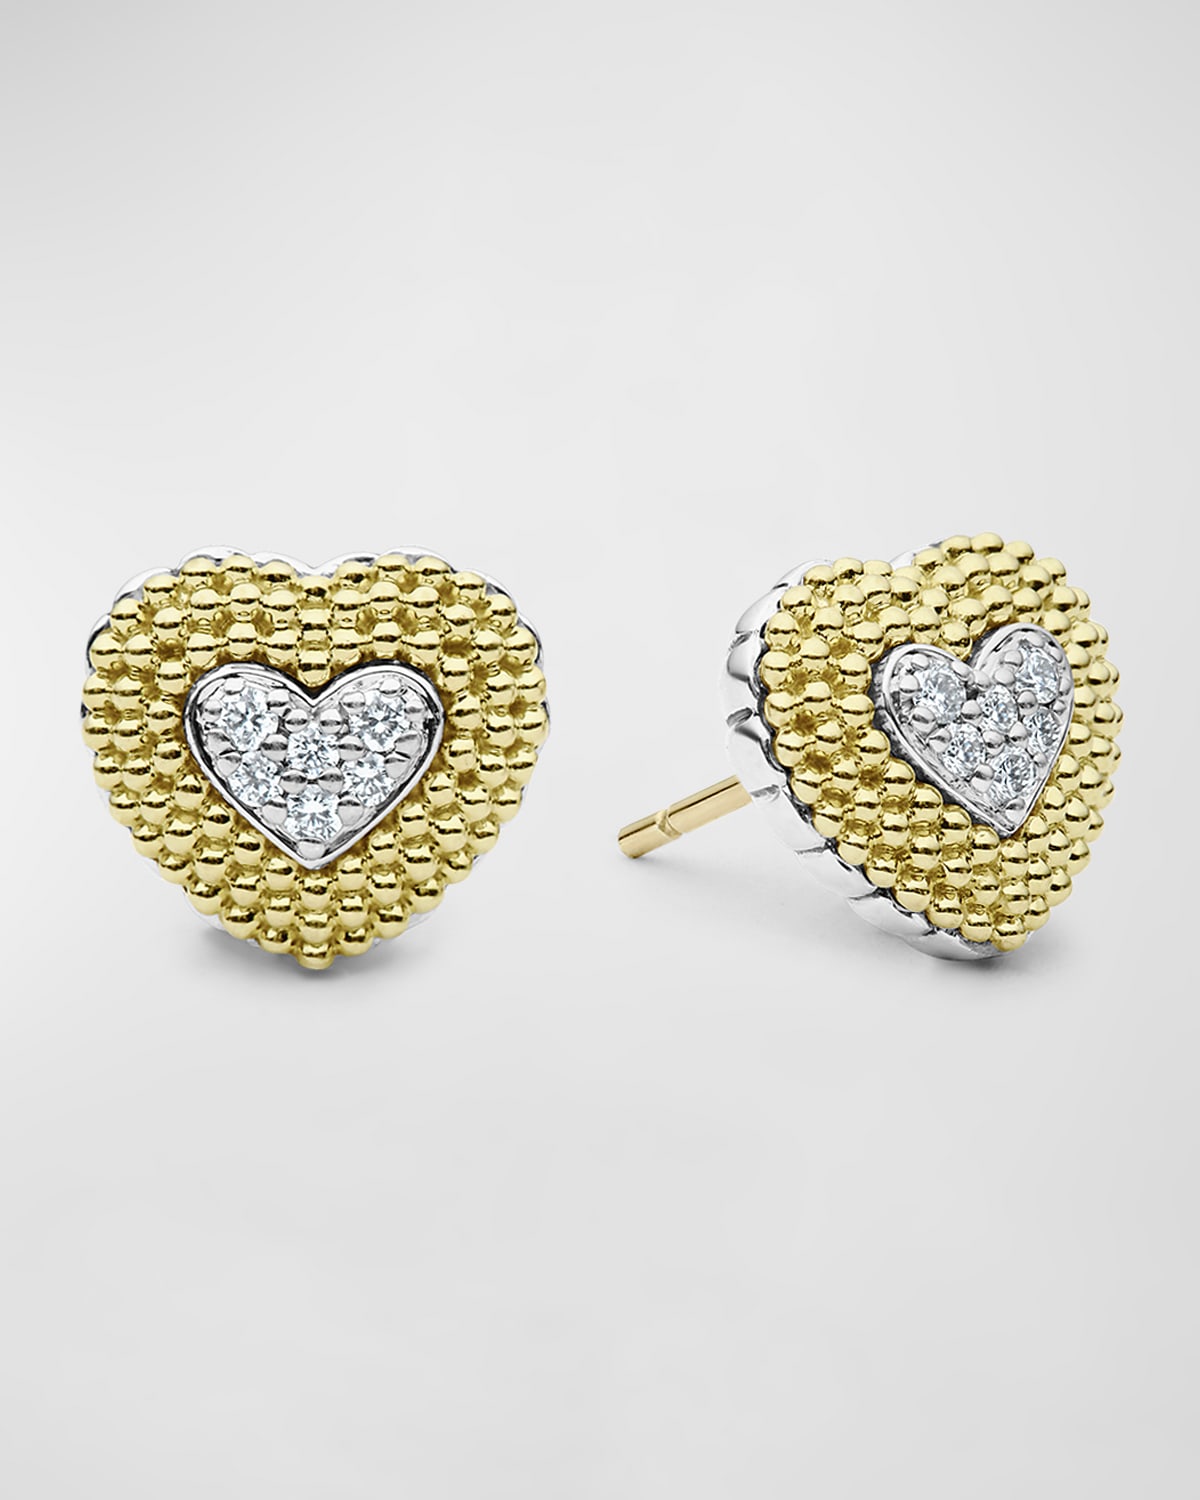 LAGOS DIAMOND HEART STUD EARRINGS IN 18K GOLD AND STERLING SILVER